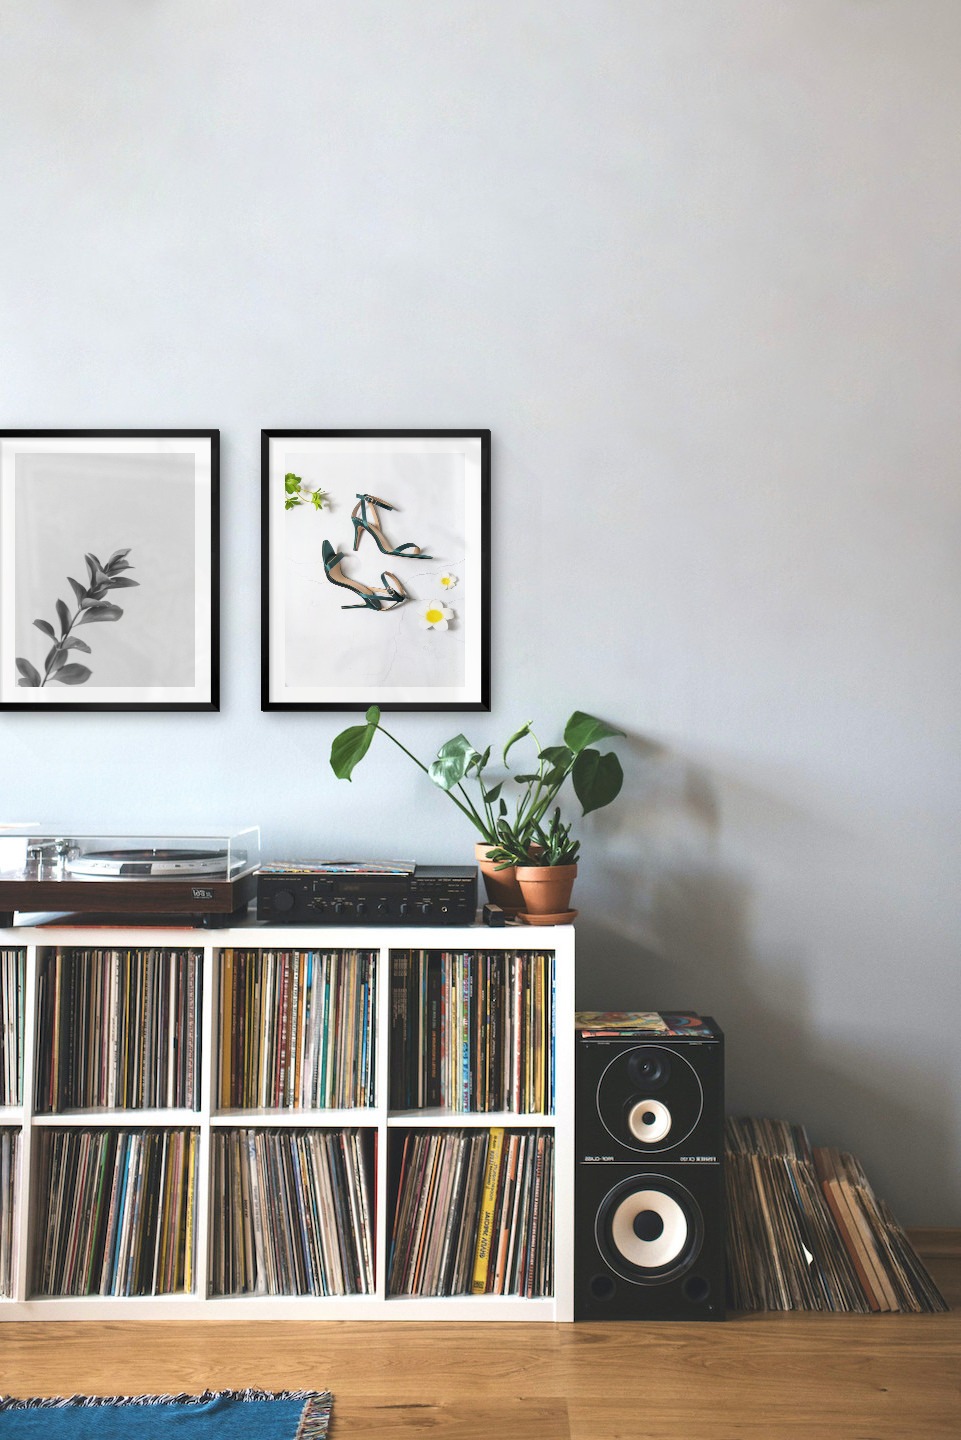 Gallery wall with picture frames in black in sizes 40x50 with prints "Twig" and "Heels"